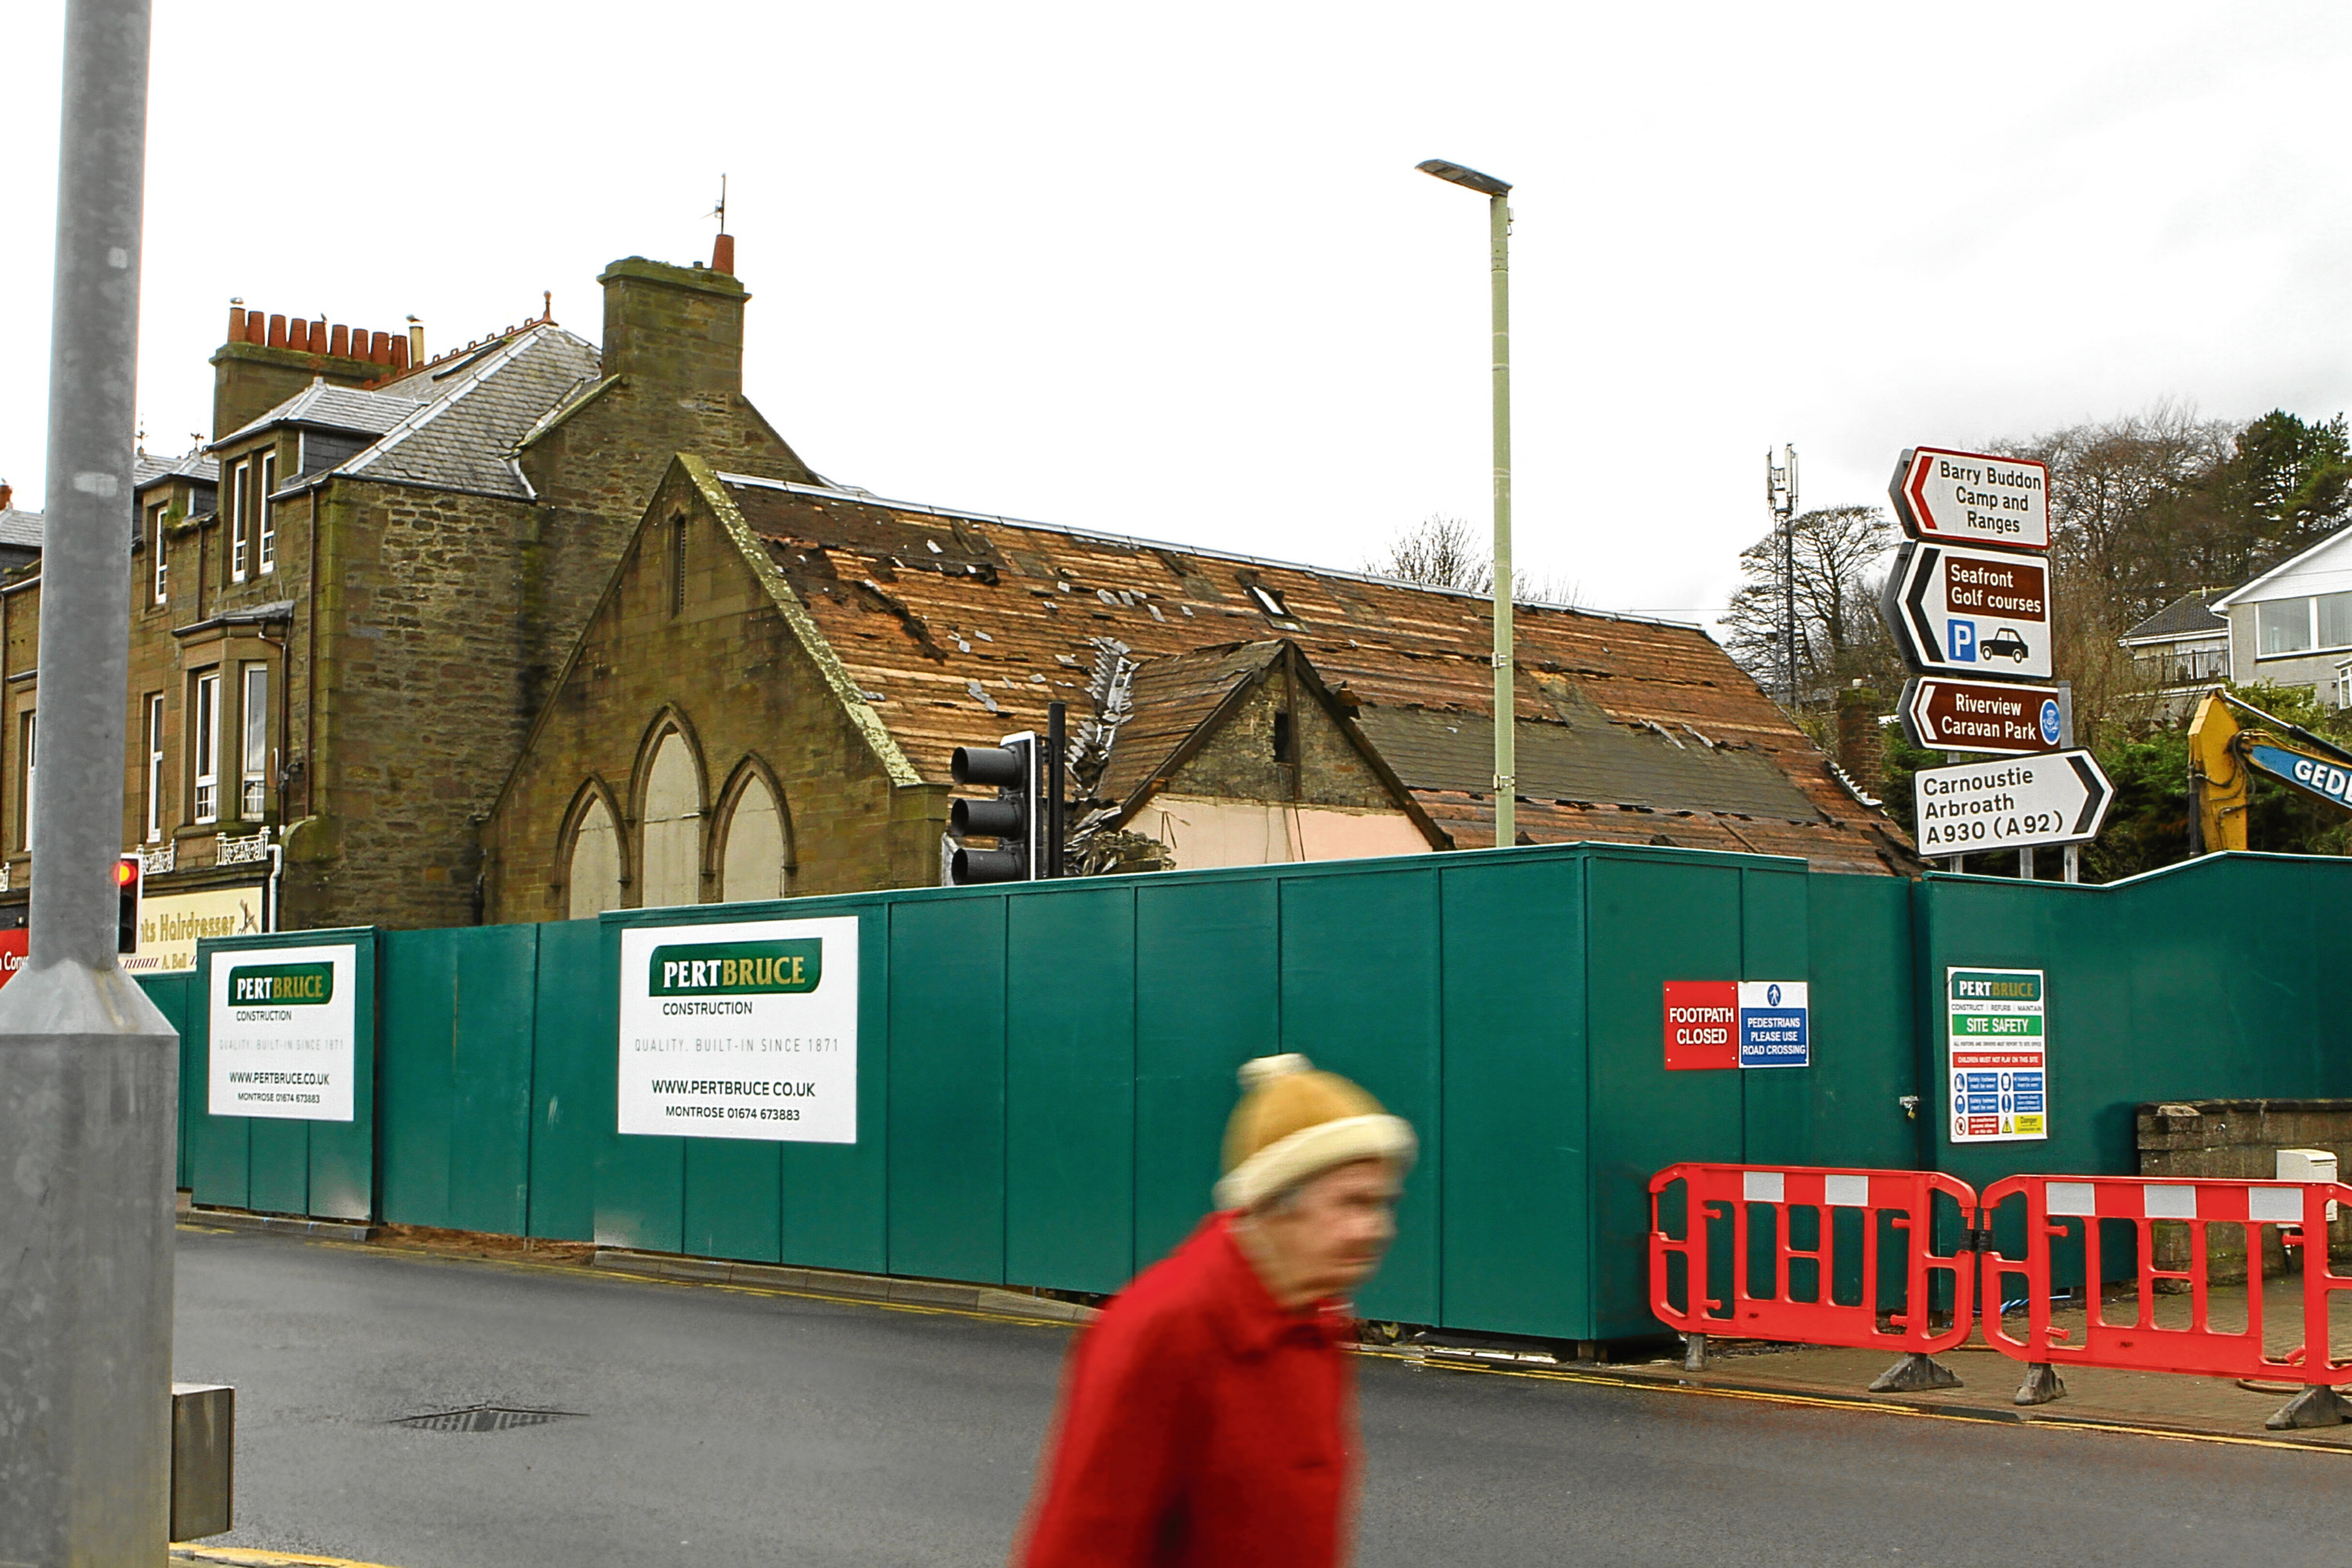 Courier News - Paul Malik story - Demolition - Monifieth.
CR0000651
Picture shows; the demolition of the South Church Halls in Monifieth continuing today. Tuesday 17th April 2018.